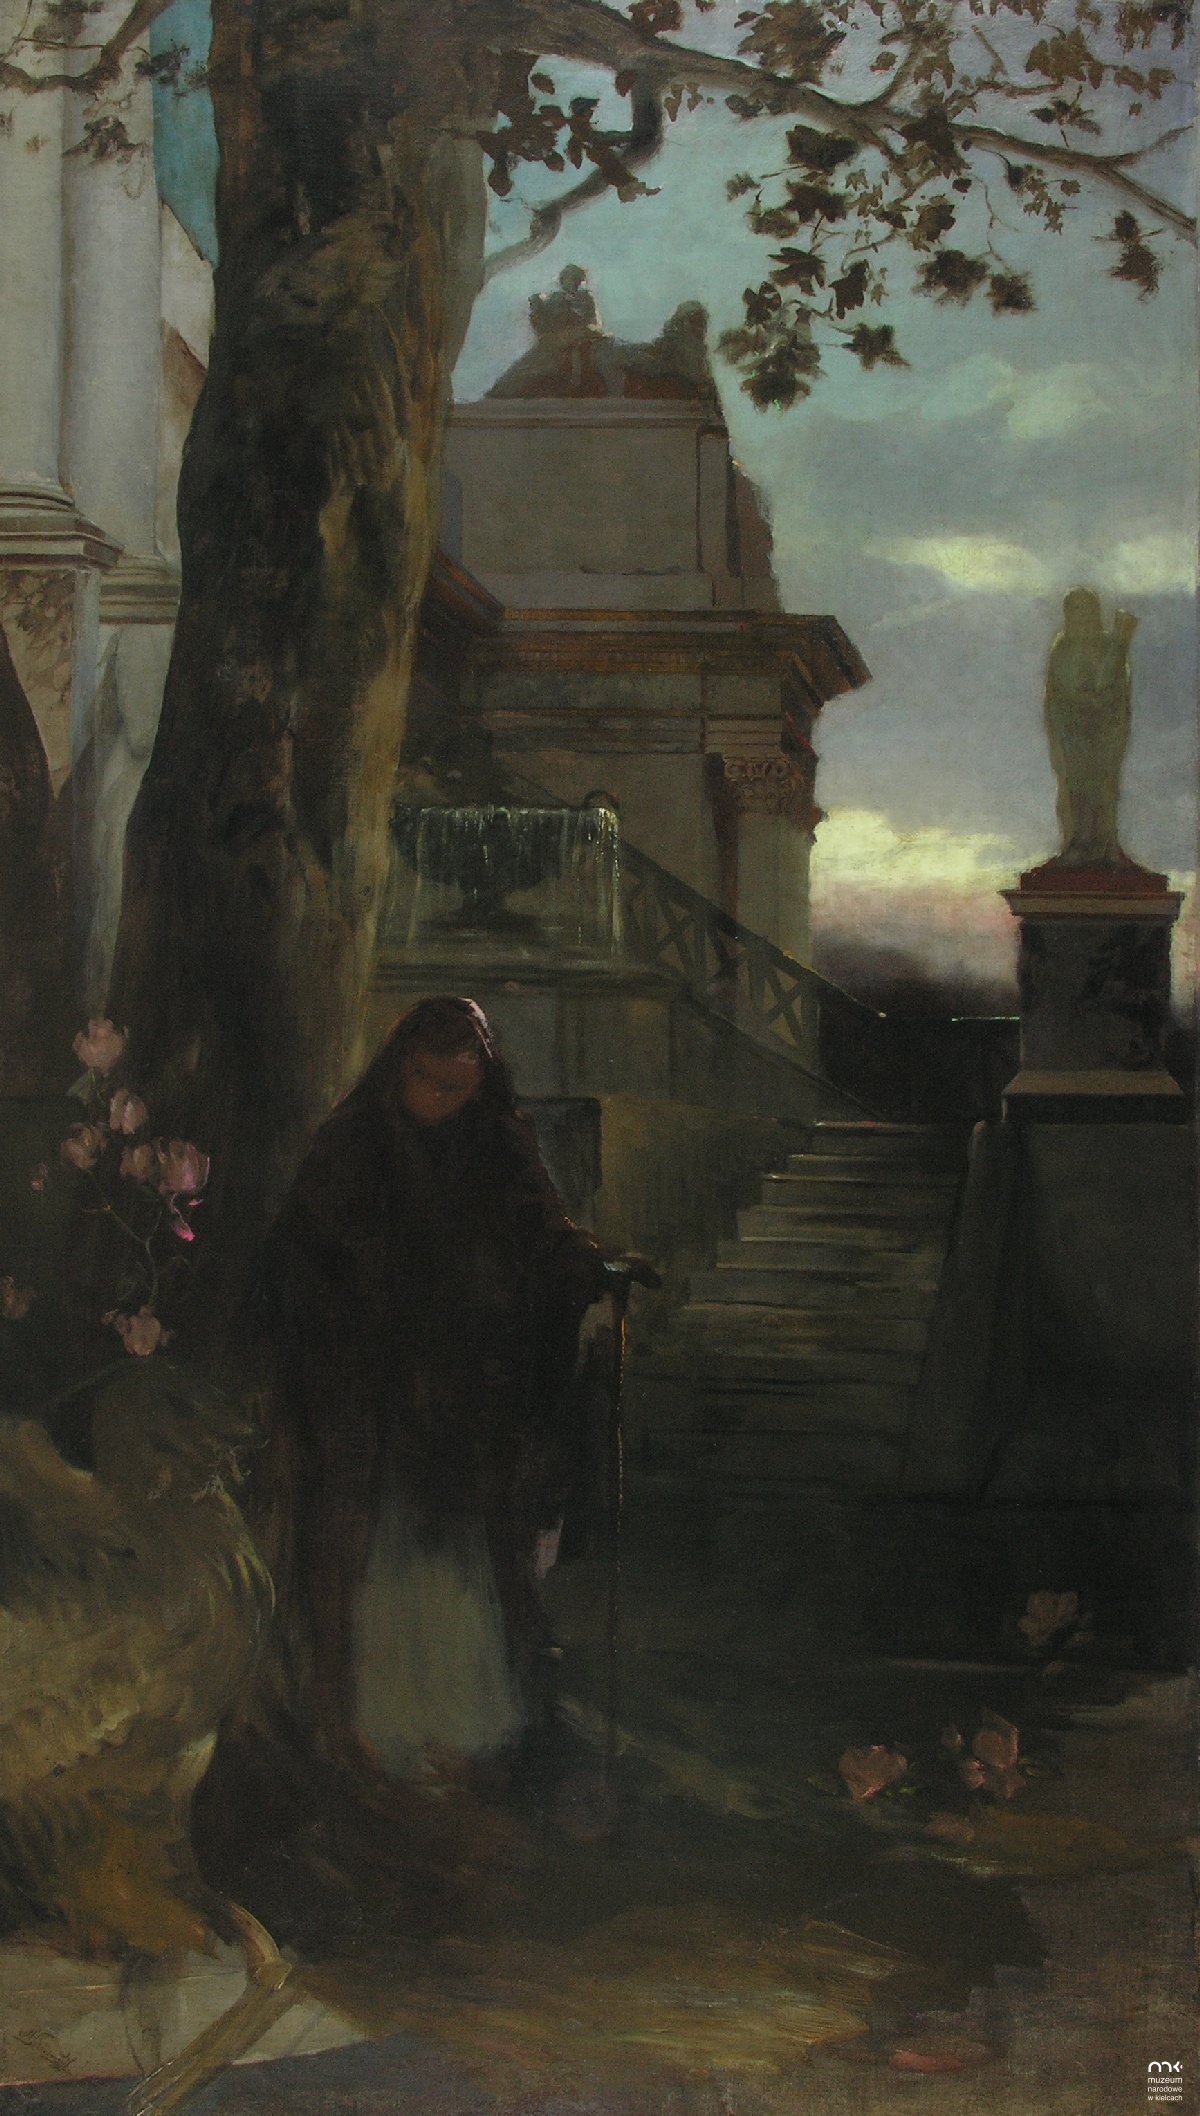 Woman in front of a Palace at Dusk